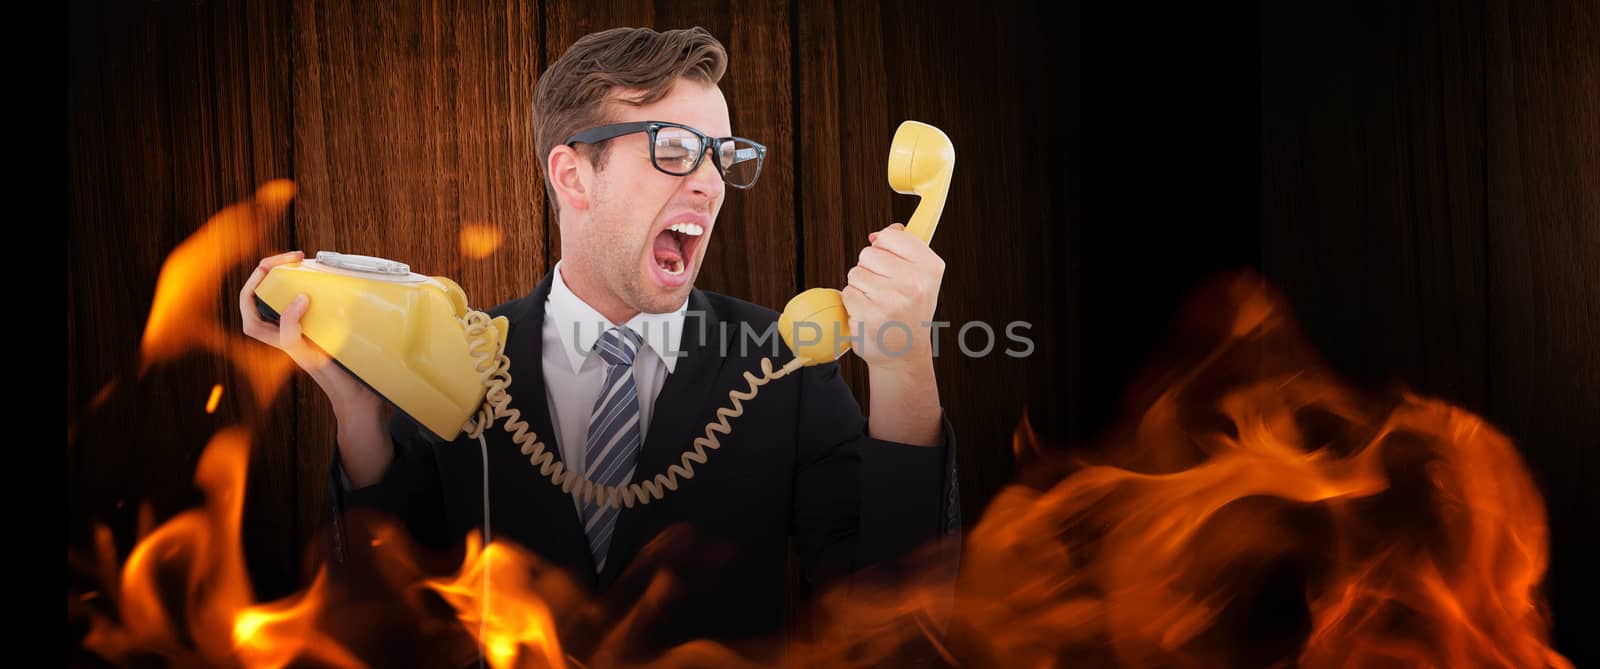 Geeky businessman shouting at telephone against wooden table